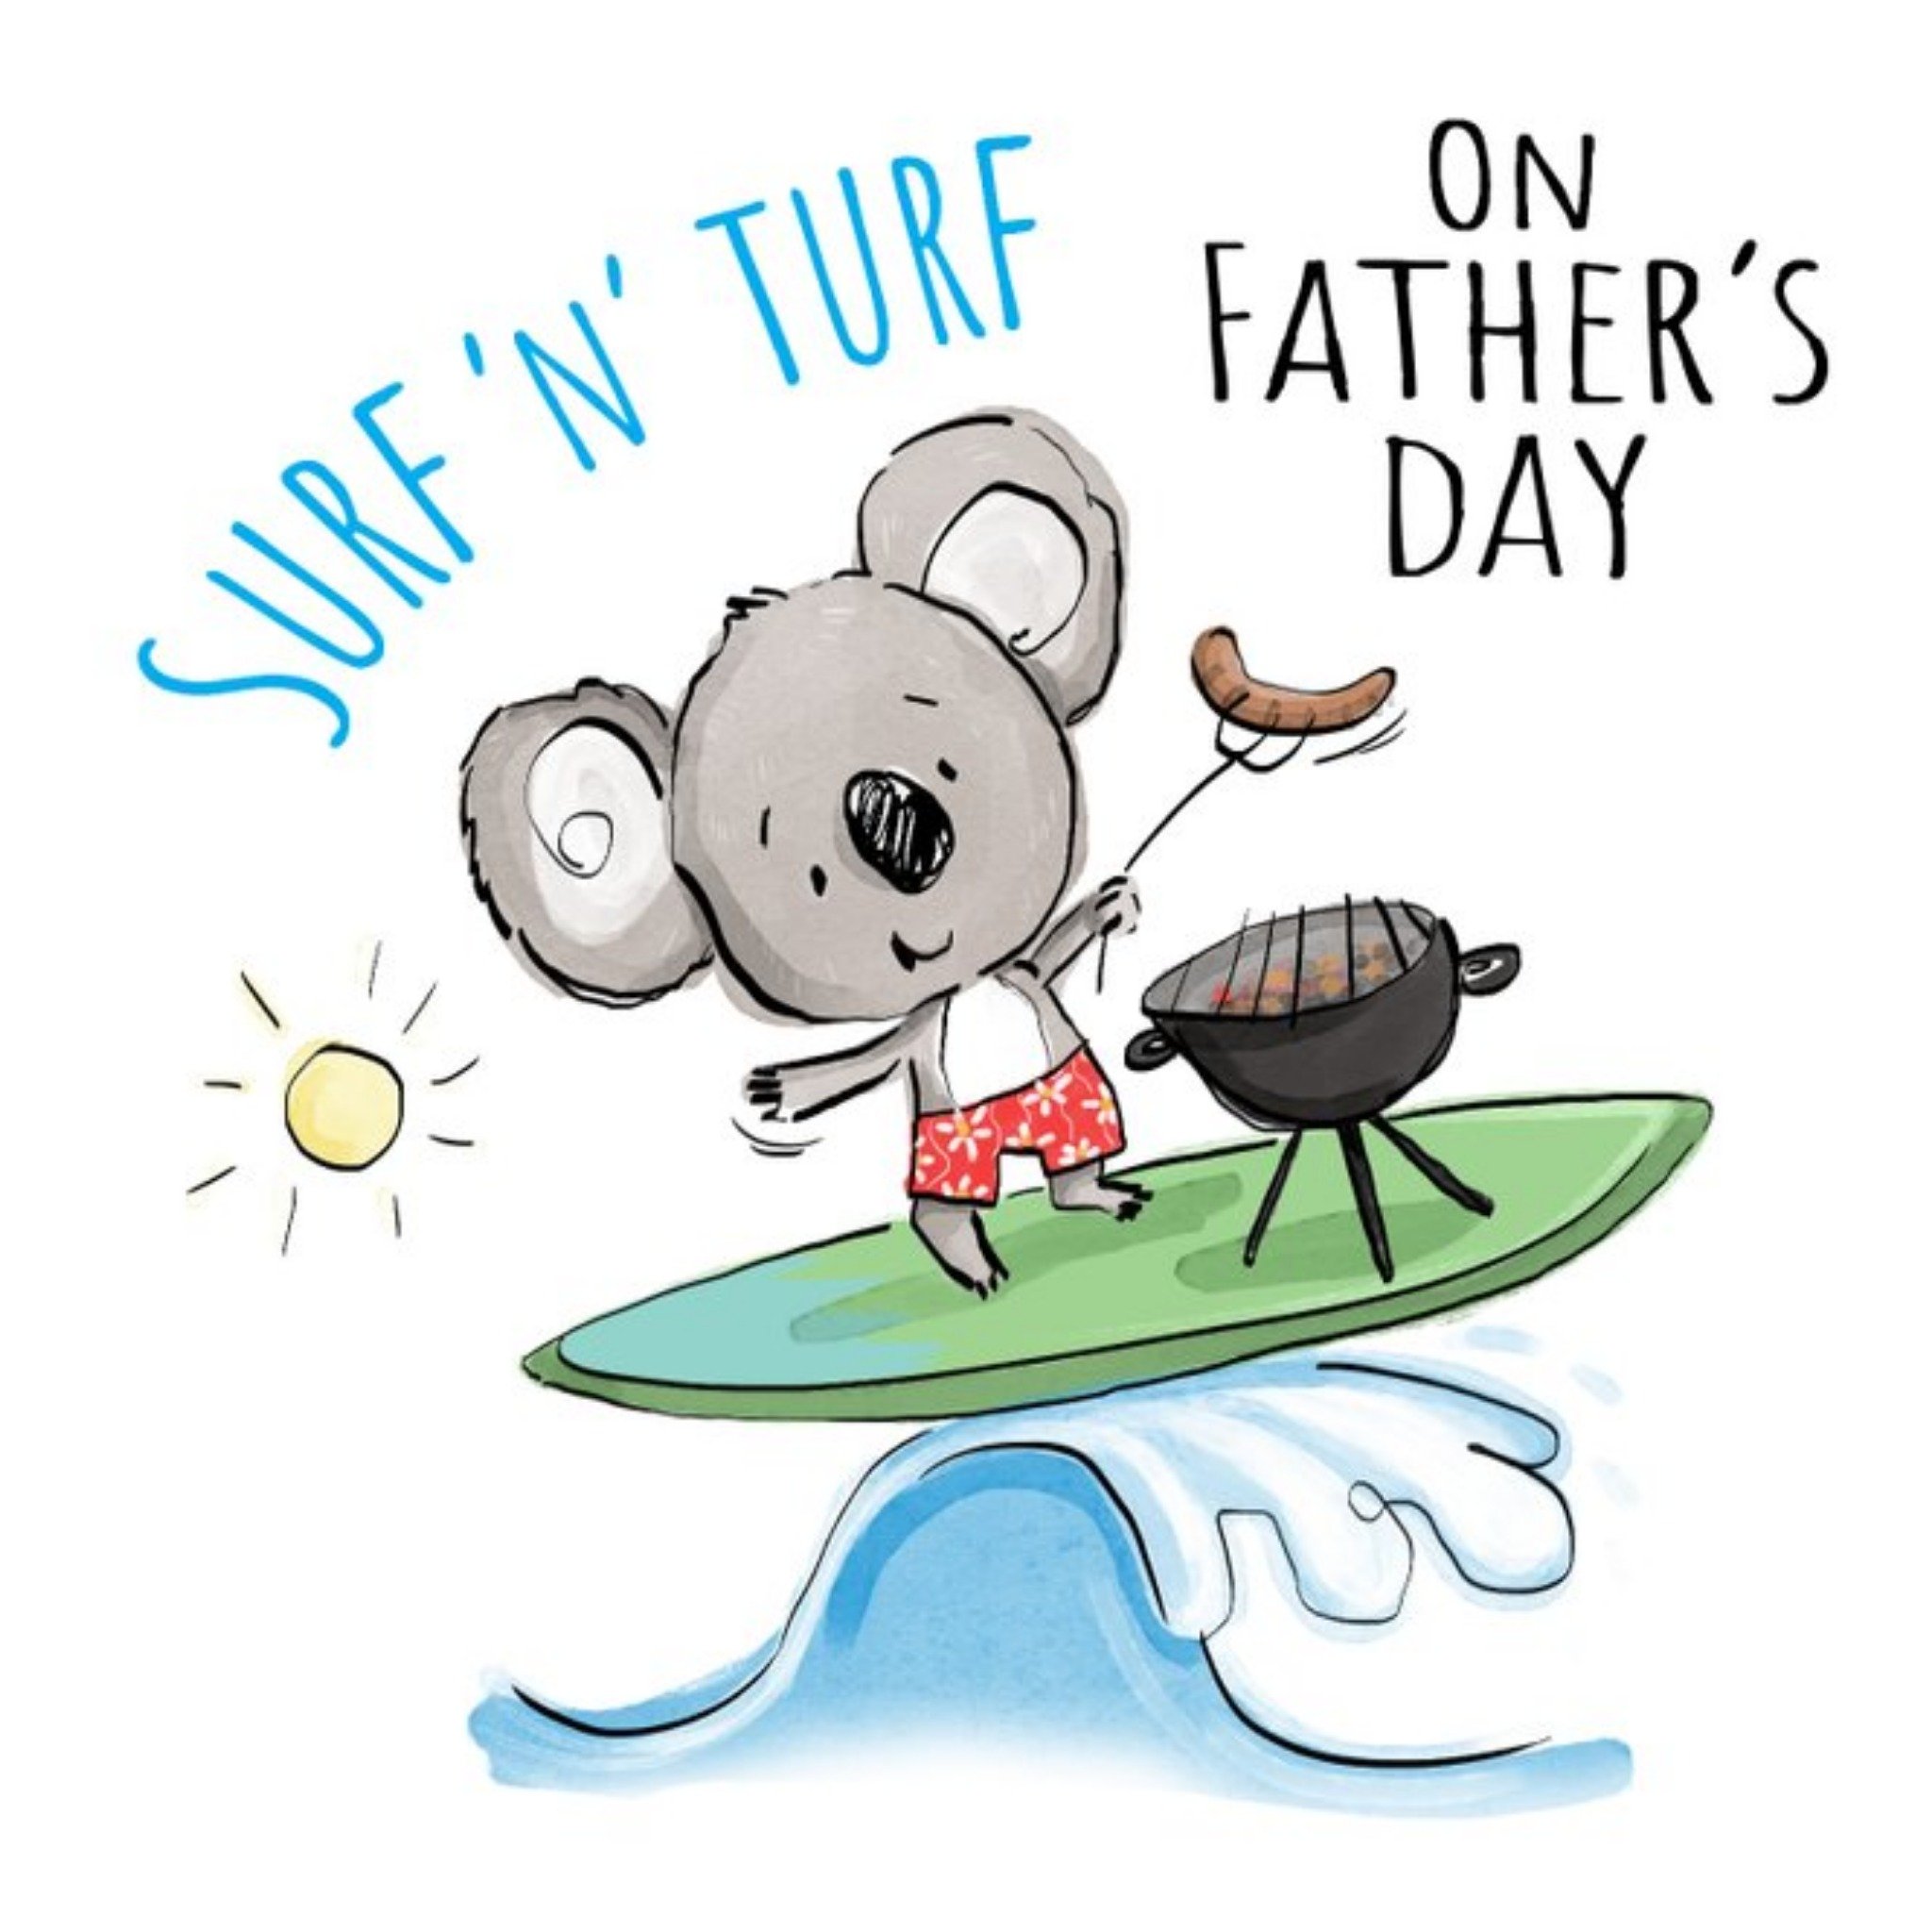 Moonpig Illustration Of A Koala Cooking Sausages On A Barbeque While Surfing Father's Day Card, Squa